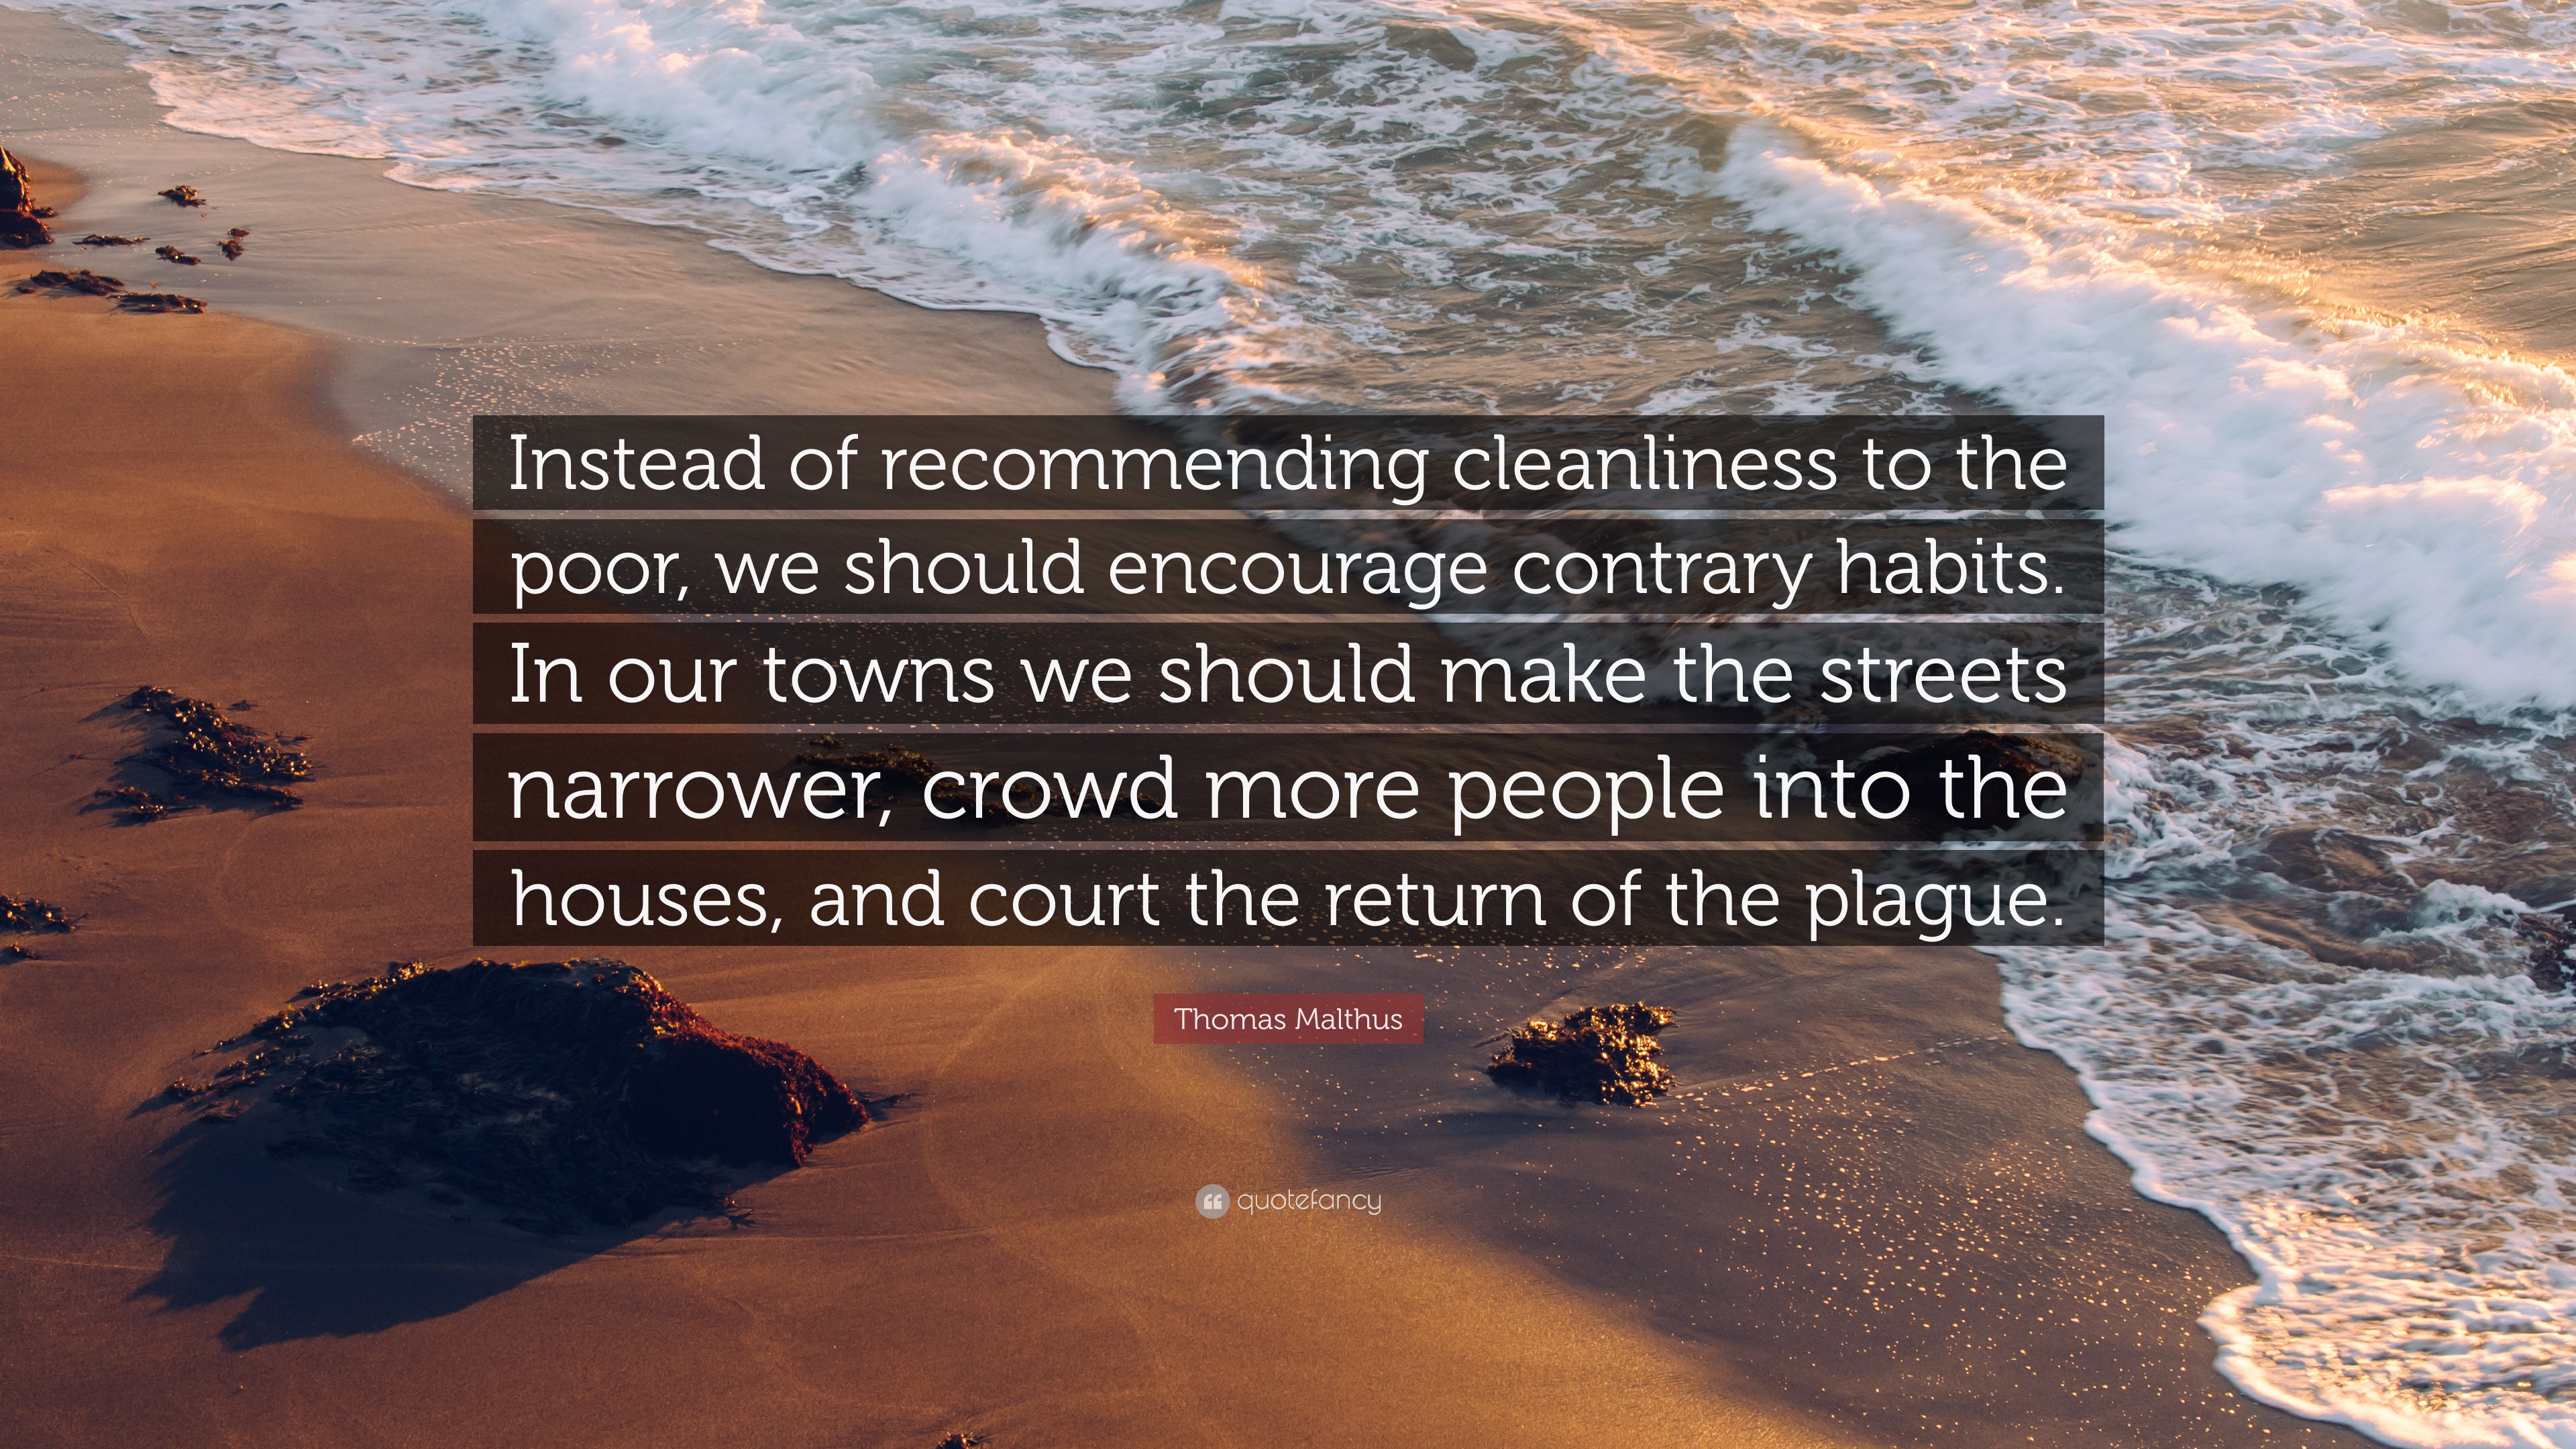 https://quotefancy.com/media/wallpaper/3840x2160/2860347-Thomas-Malthus-Quote-Instead-of-recommending-cleanliness-to-the.jpg